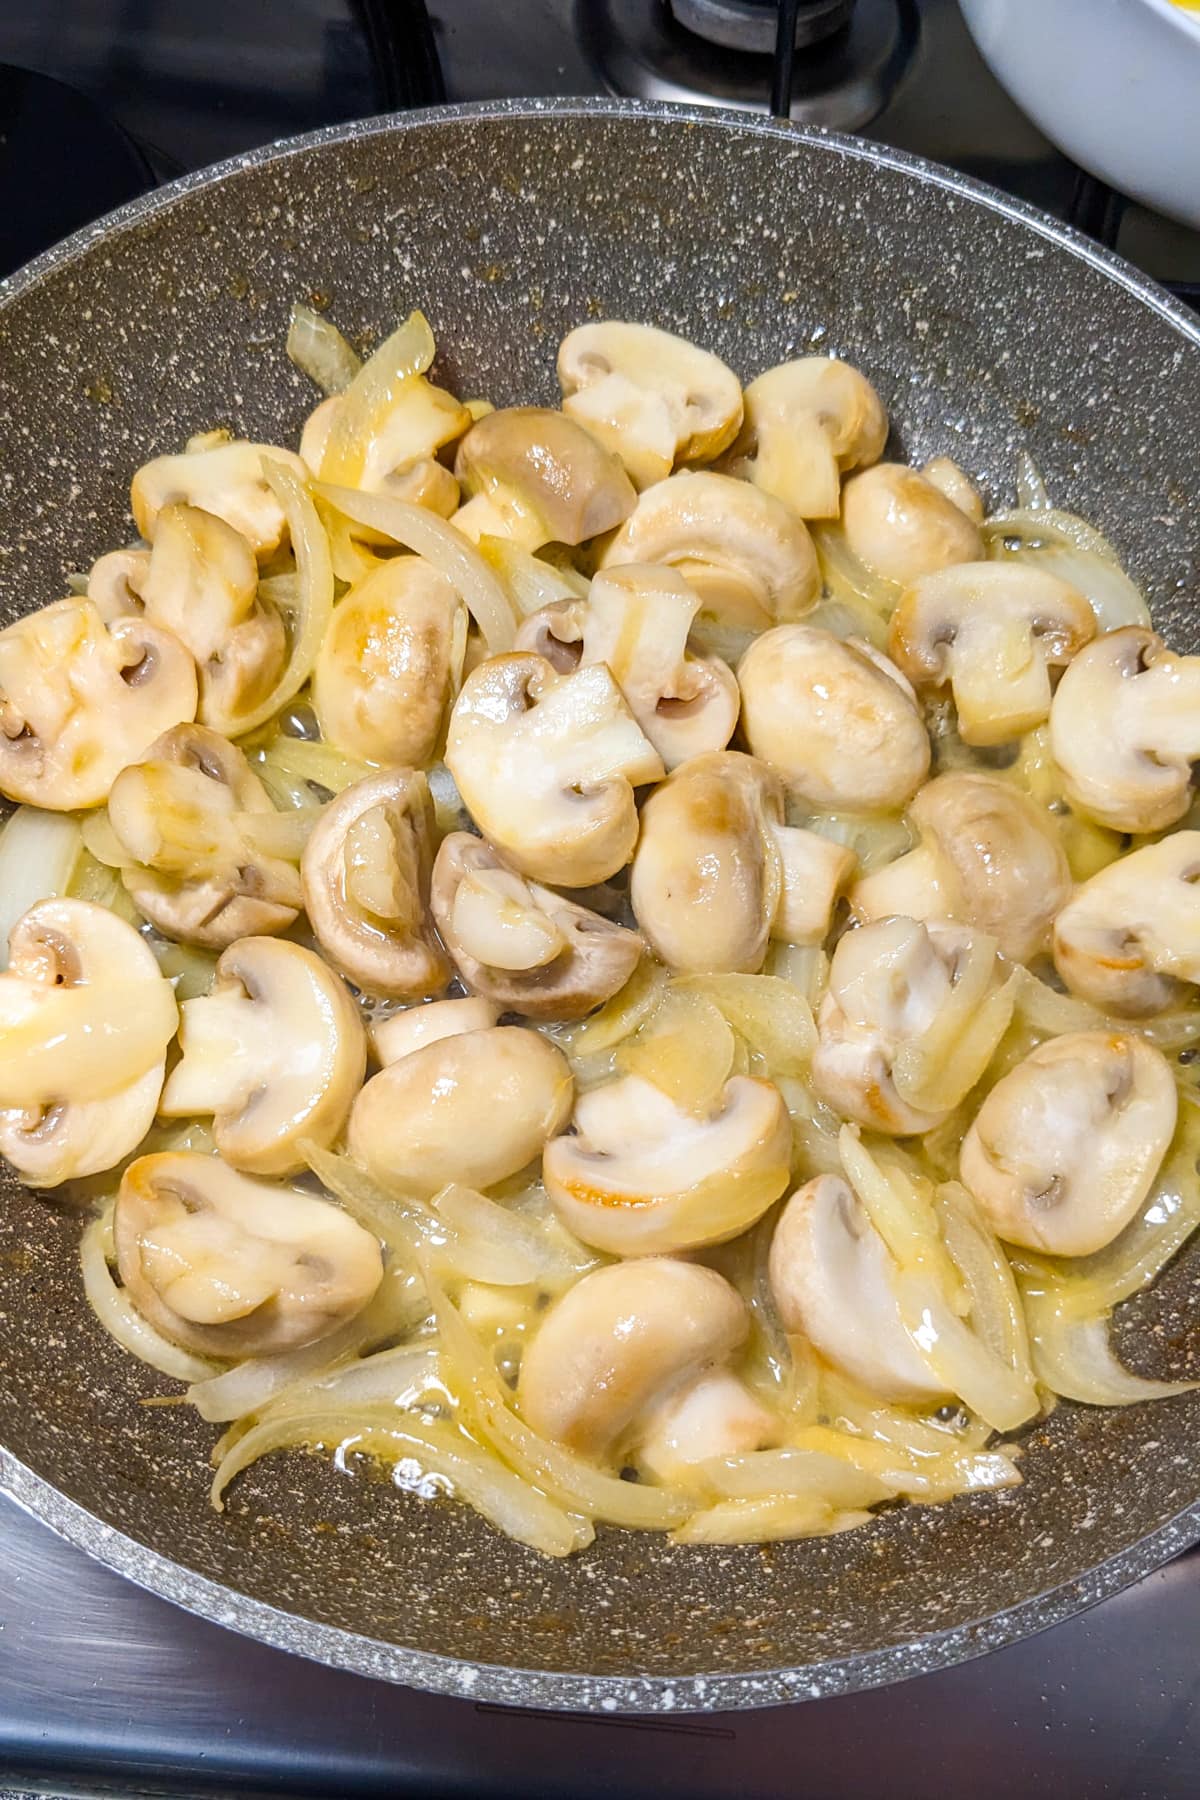 Fried onions and sliced mushrooms in a frying pan.